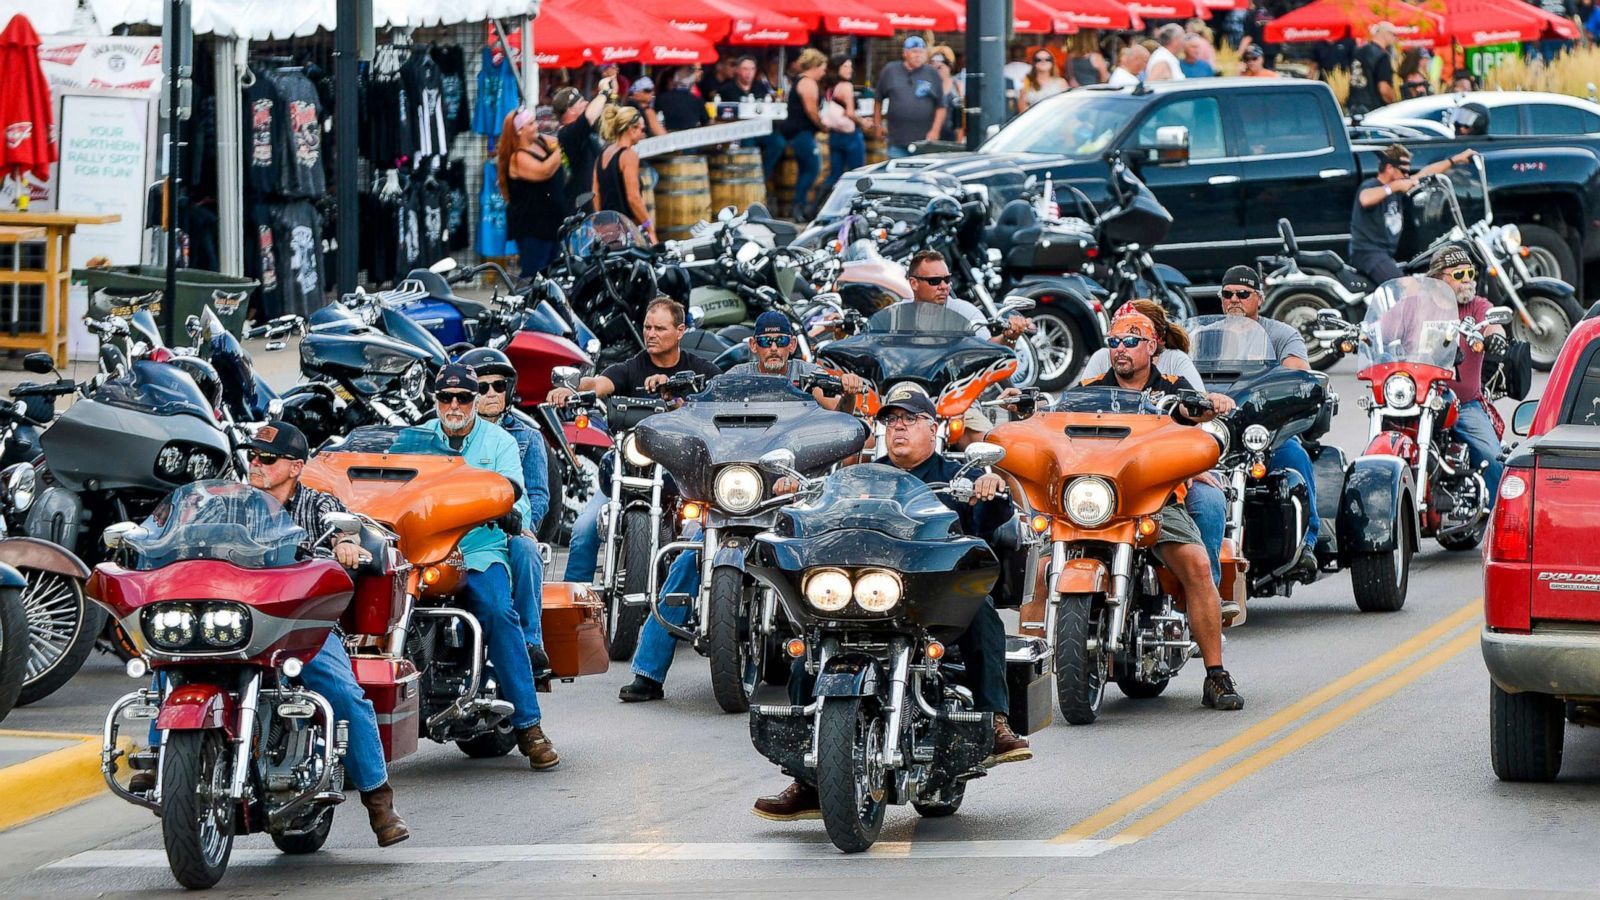 Sturgis Motorcycle Rally could draw 000 people in South Dakota despite COVID pandemic